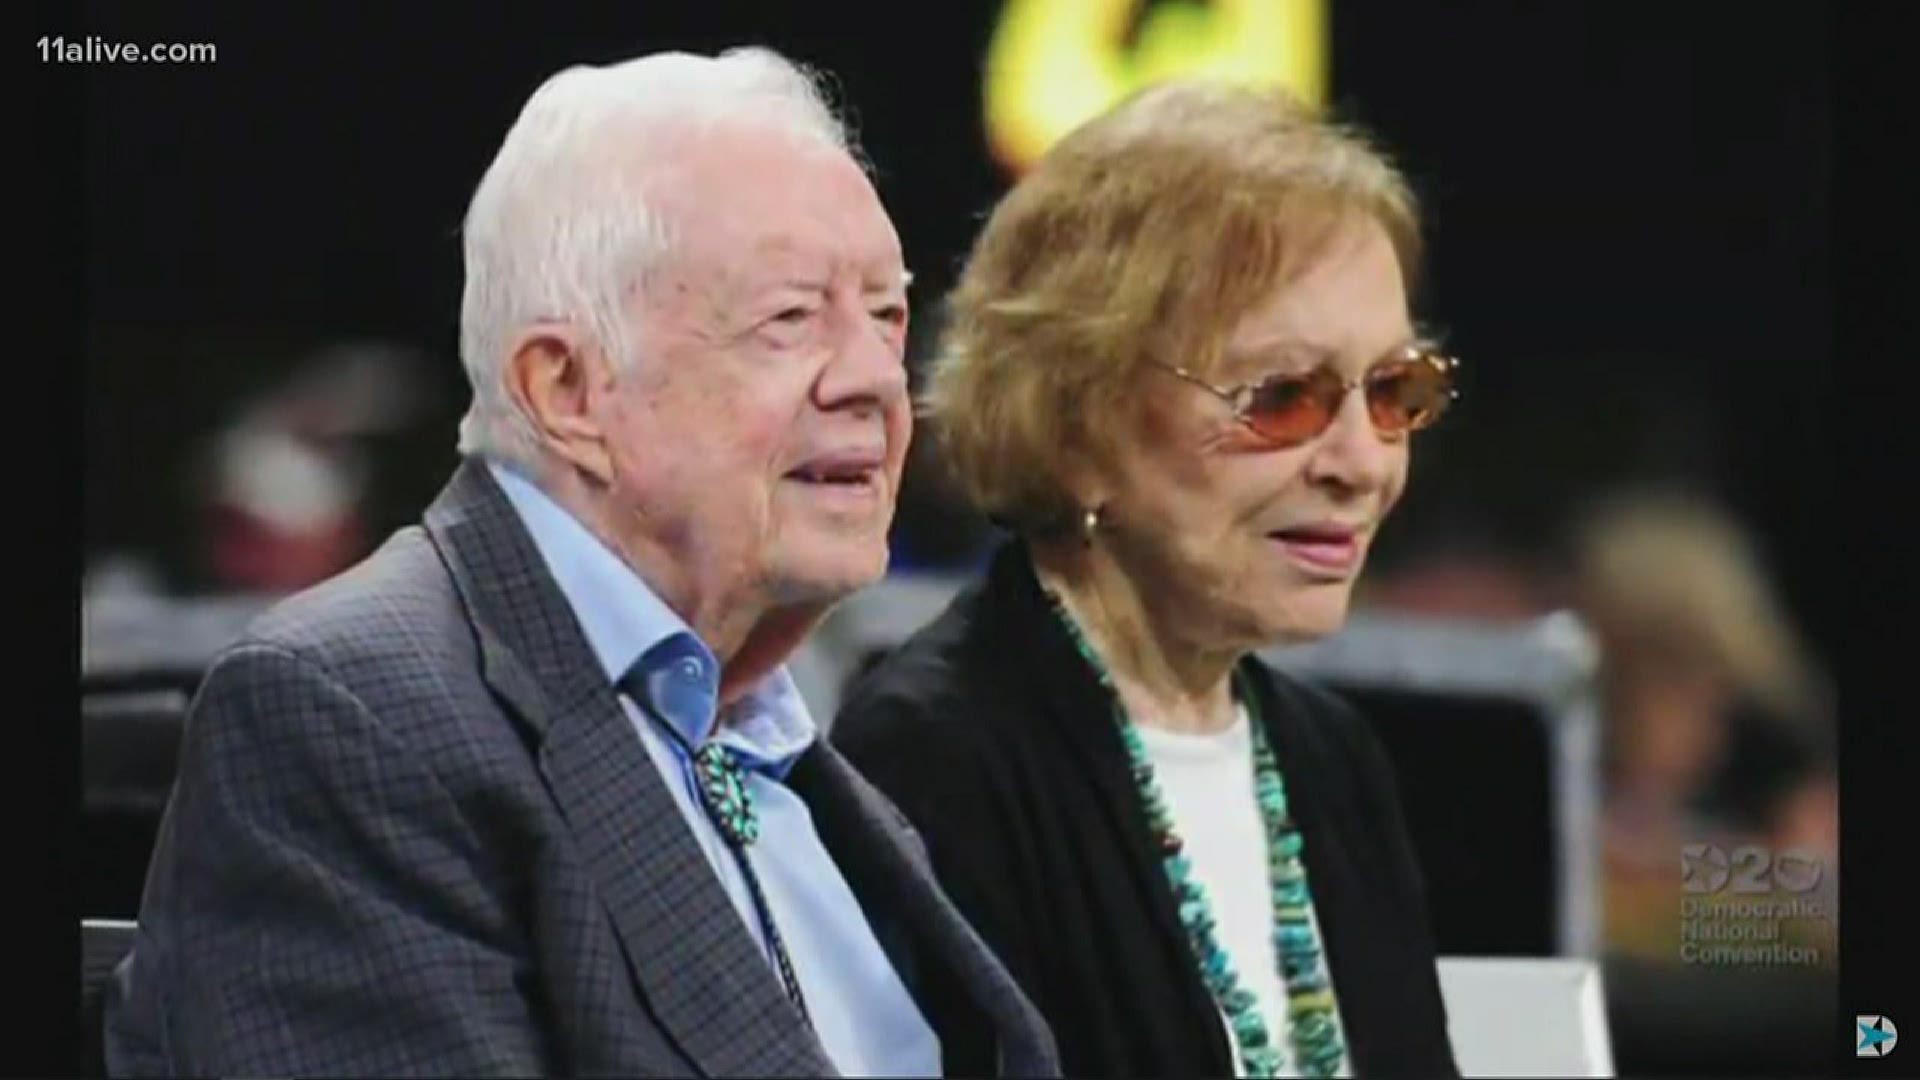 The former president and first lady said Biden understands the troubles facing America's families.